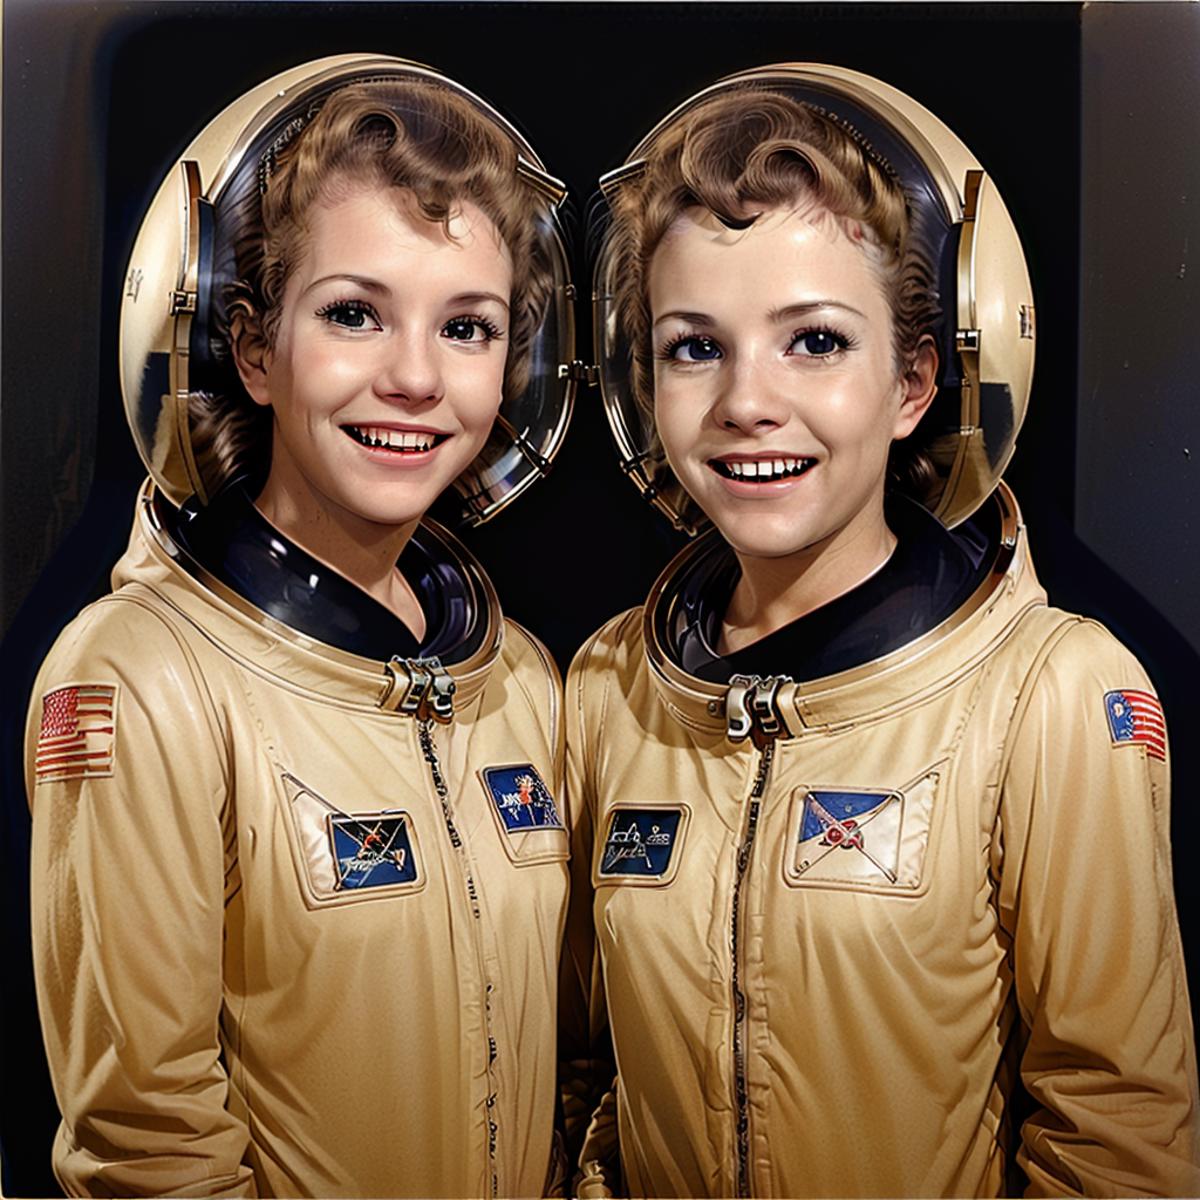 The Collinson Twins image by Jabberwocky207